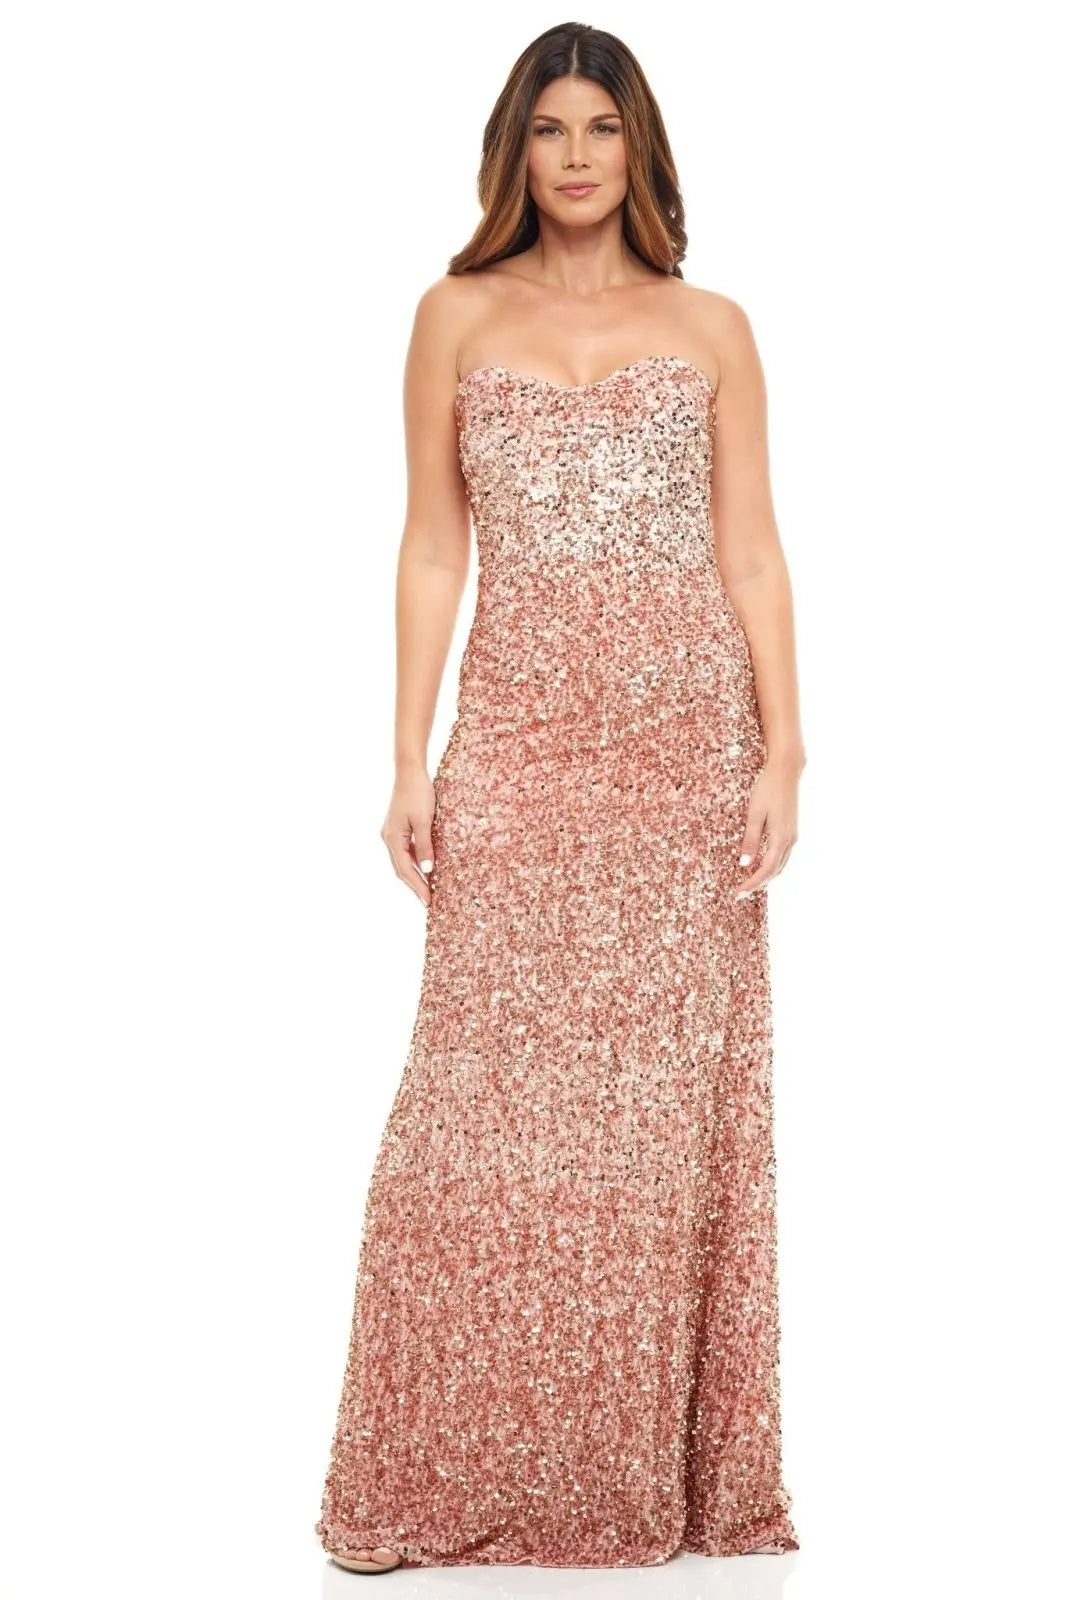 Strapless Plunging Sweetheart Neckline Gown Pink 